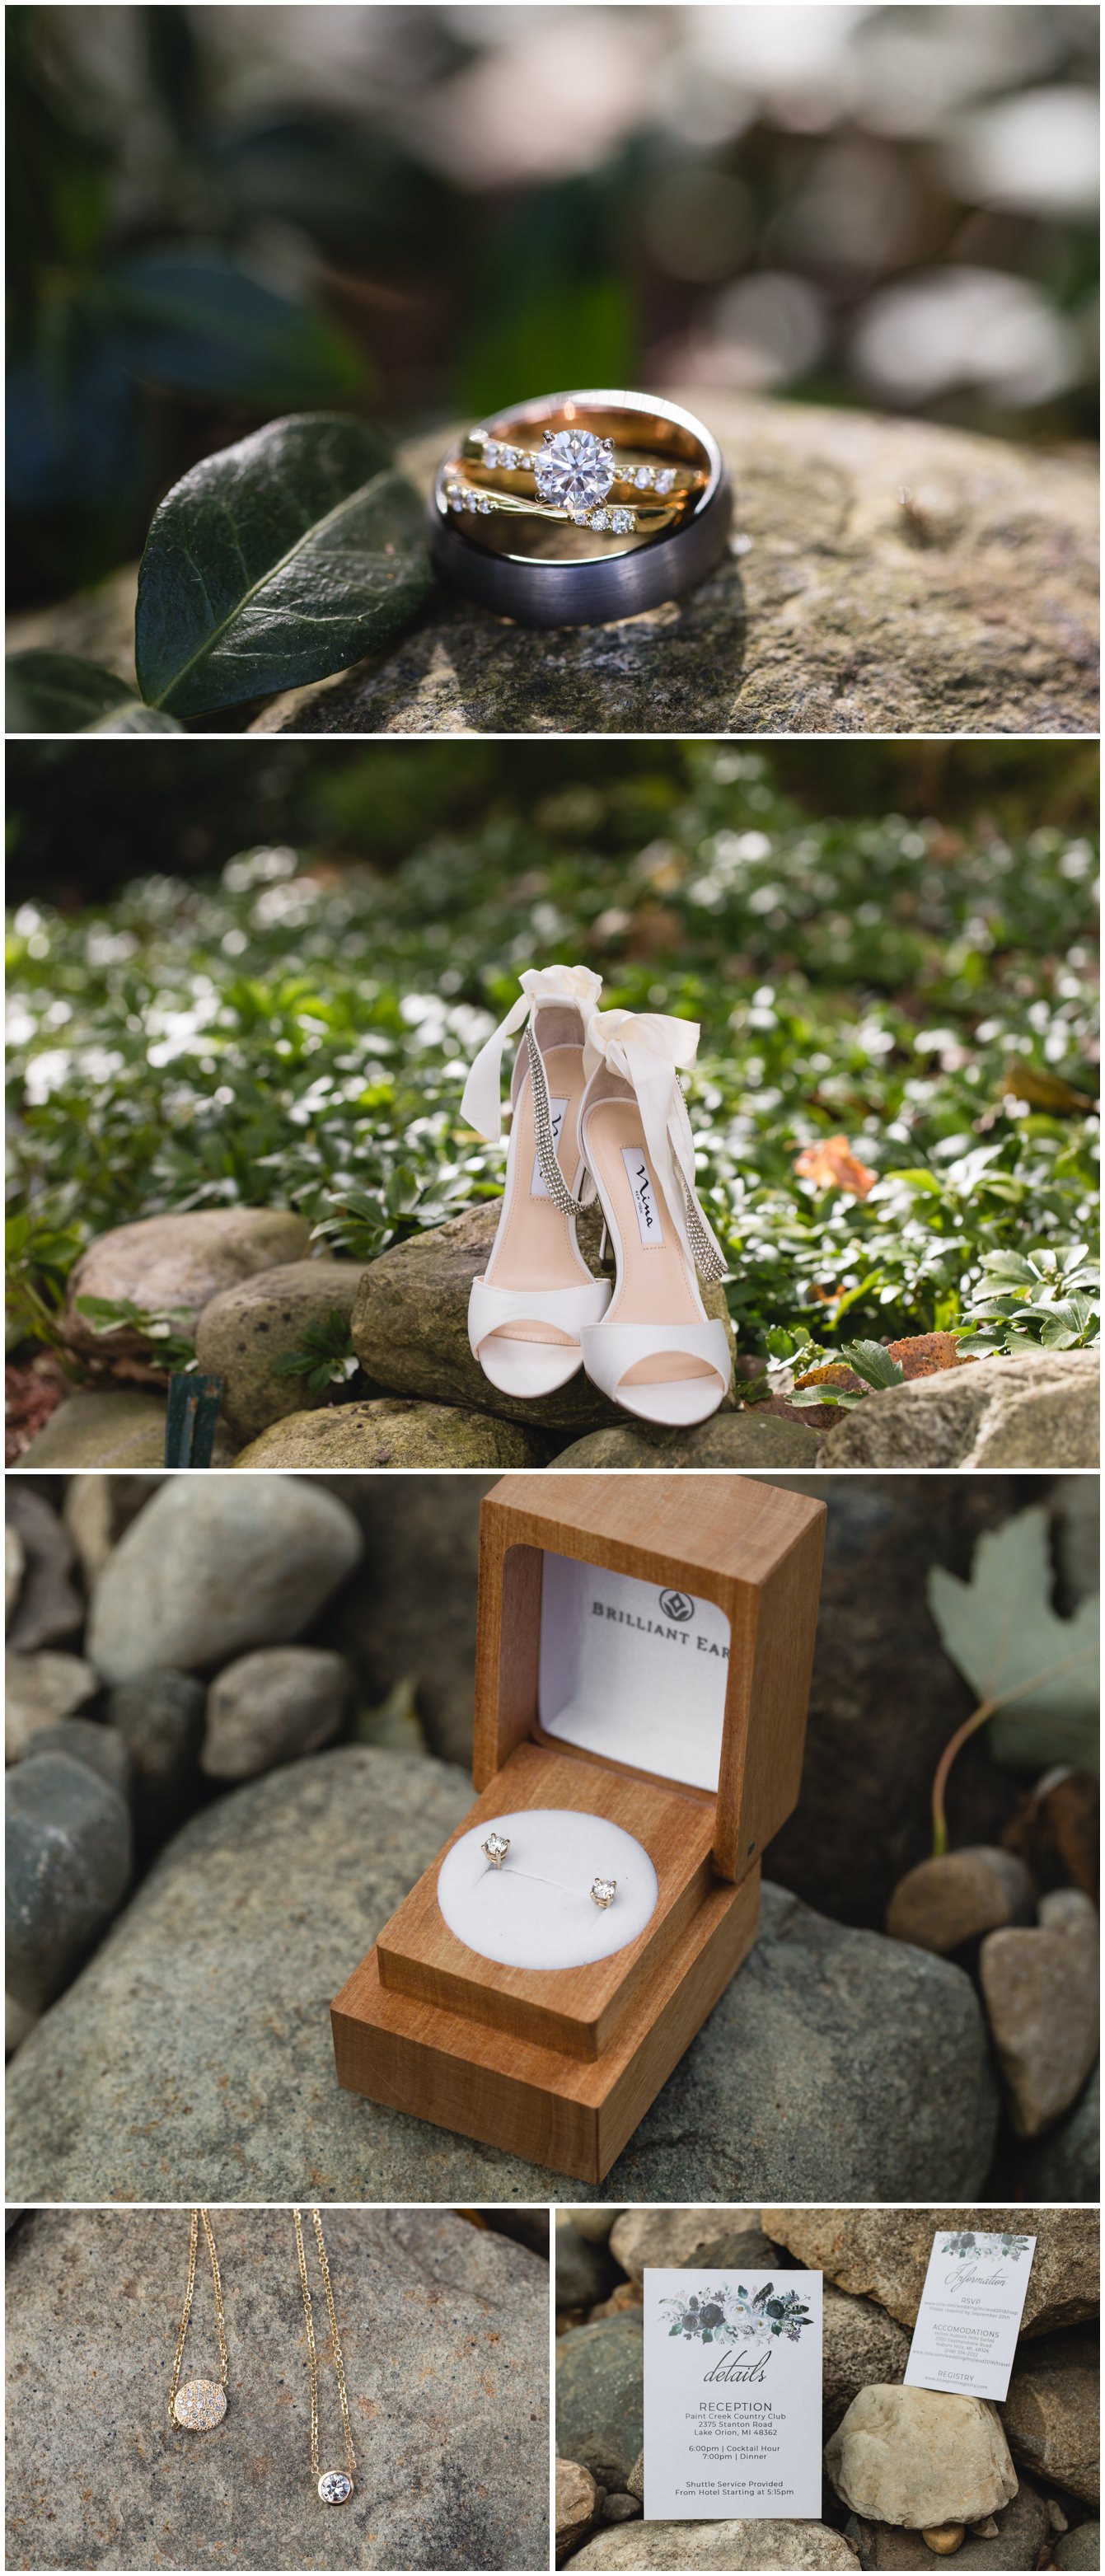 brides rings, shoes, jewelry, and invitations